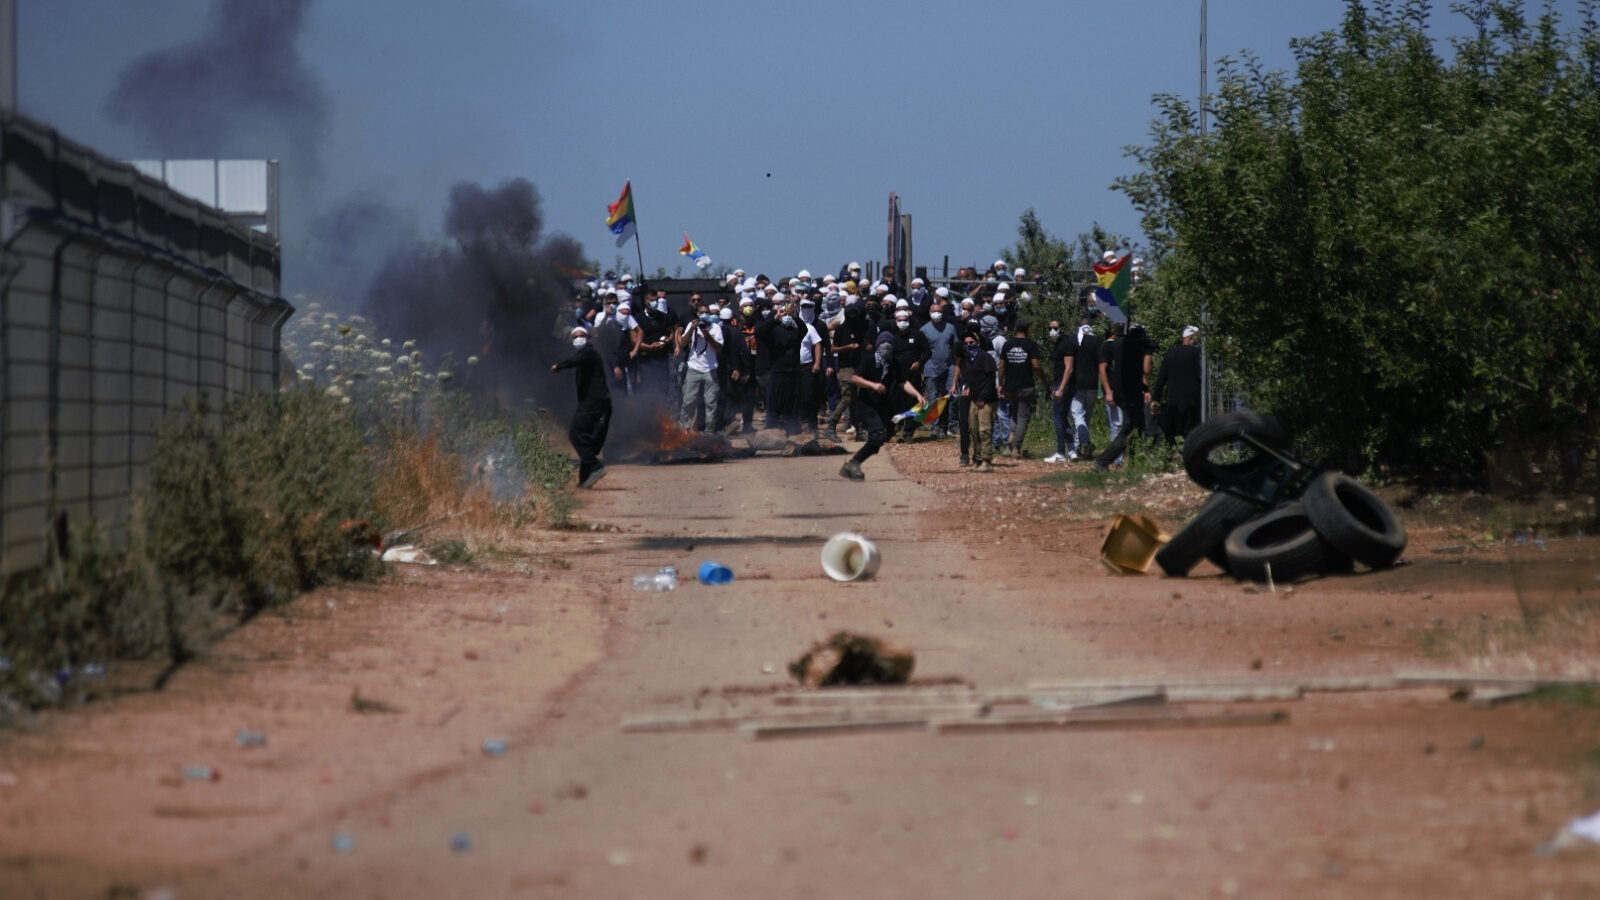 Syrian Druze In Occupied Golan Heights Clash With Israeli Police Over Wind Farm Project (Videos)